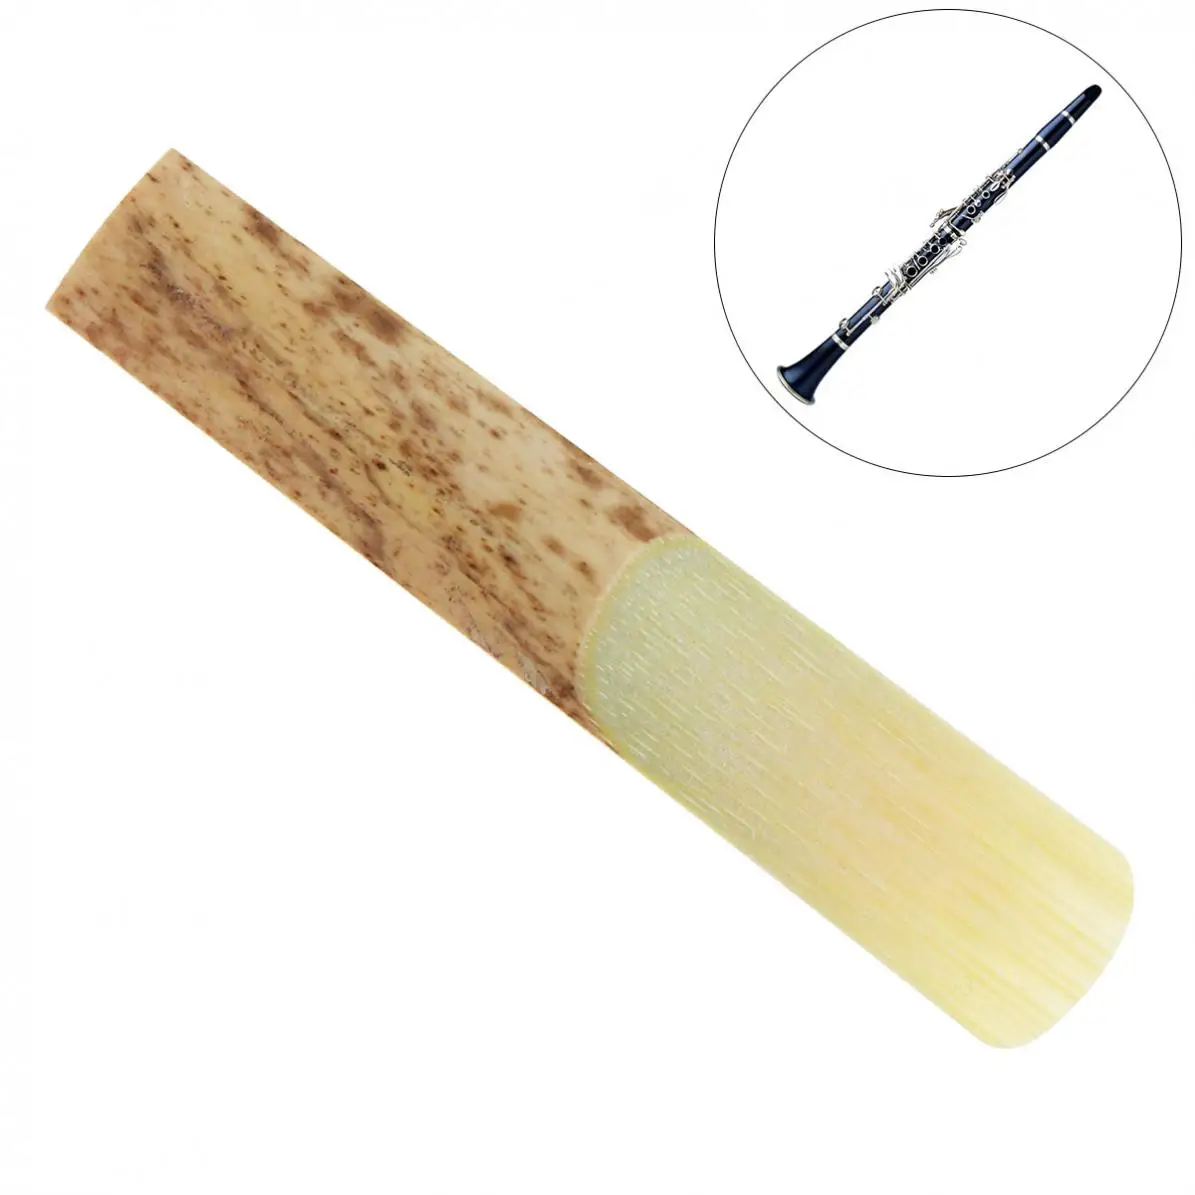 

10pcs! Professional Bamboo bB Clarinet Reeds Strength 2.5 for Clarinet Mouthpiece Parts Traditional Bamboo Reed